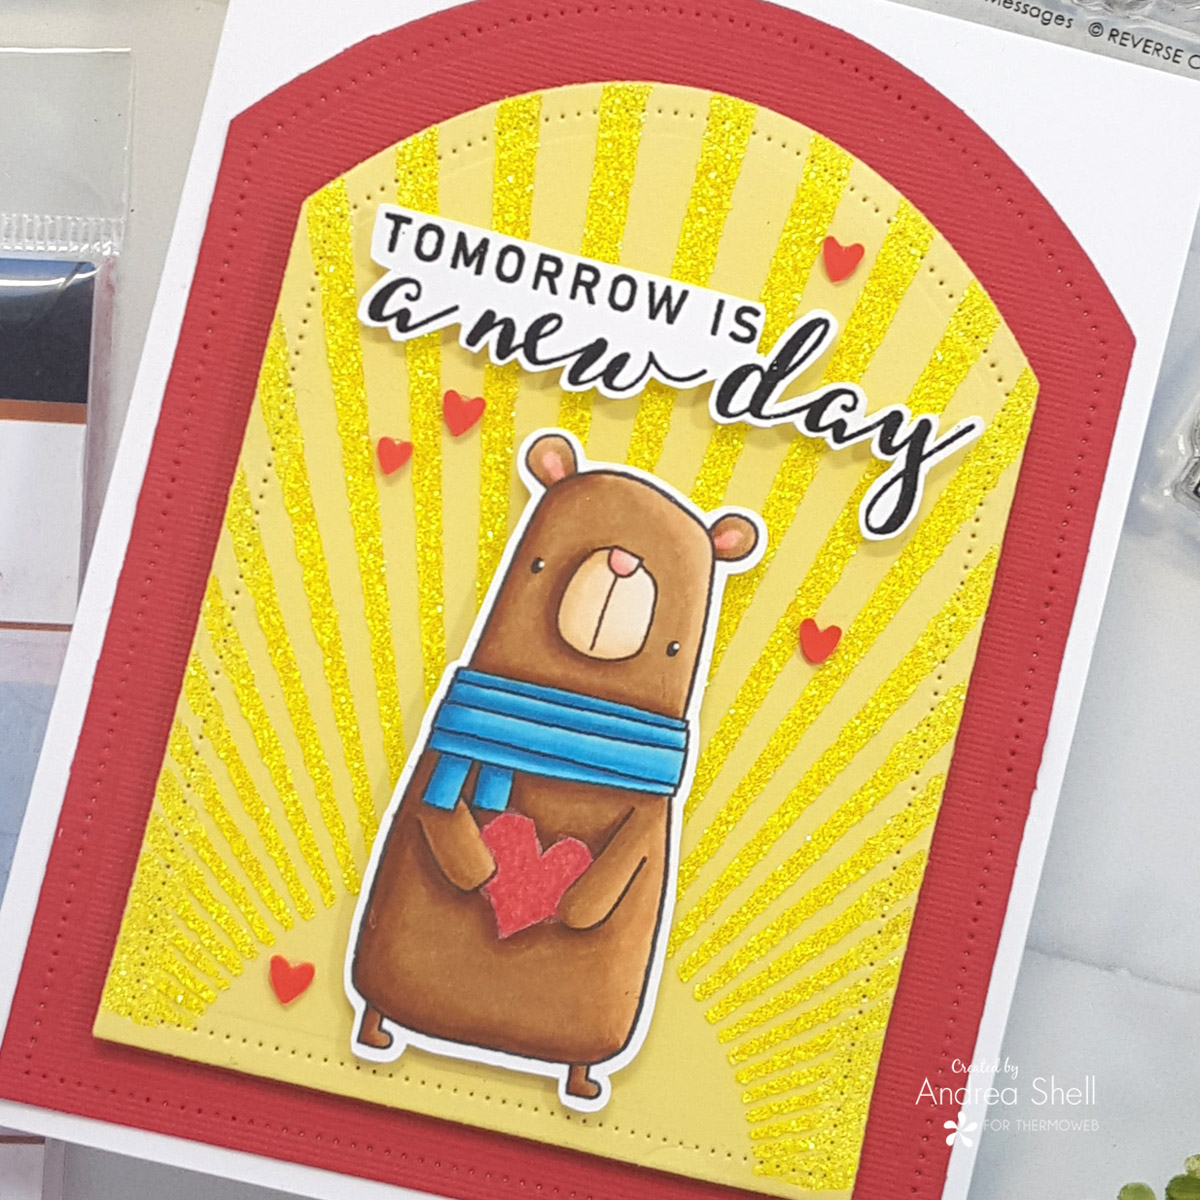 New Day Bear Card by Andrea Shell | Mixed Messages and Big Bear stamps from Reverse Confetti